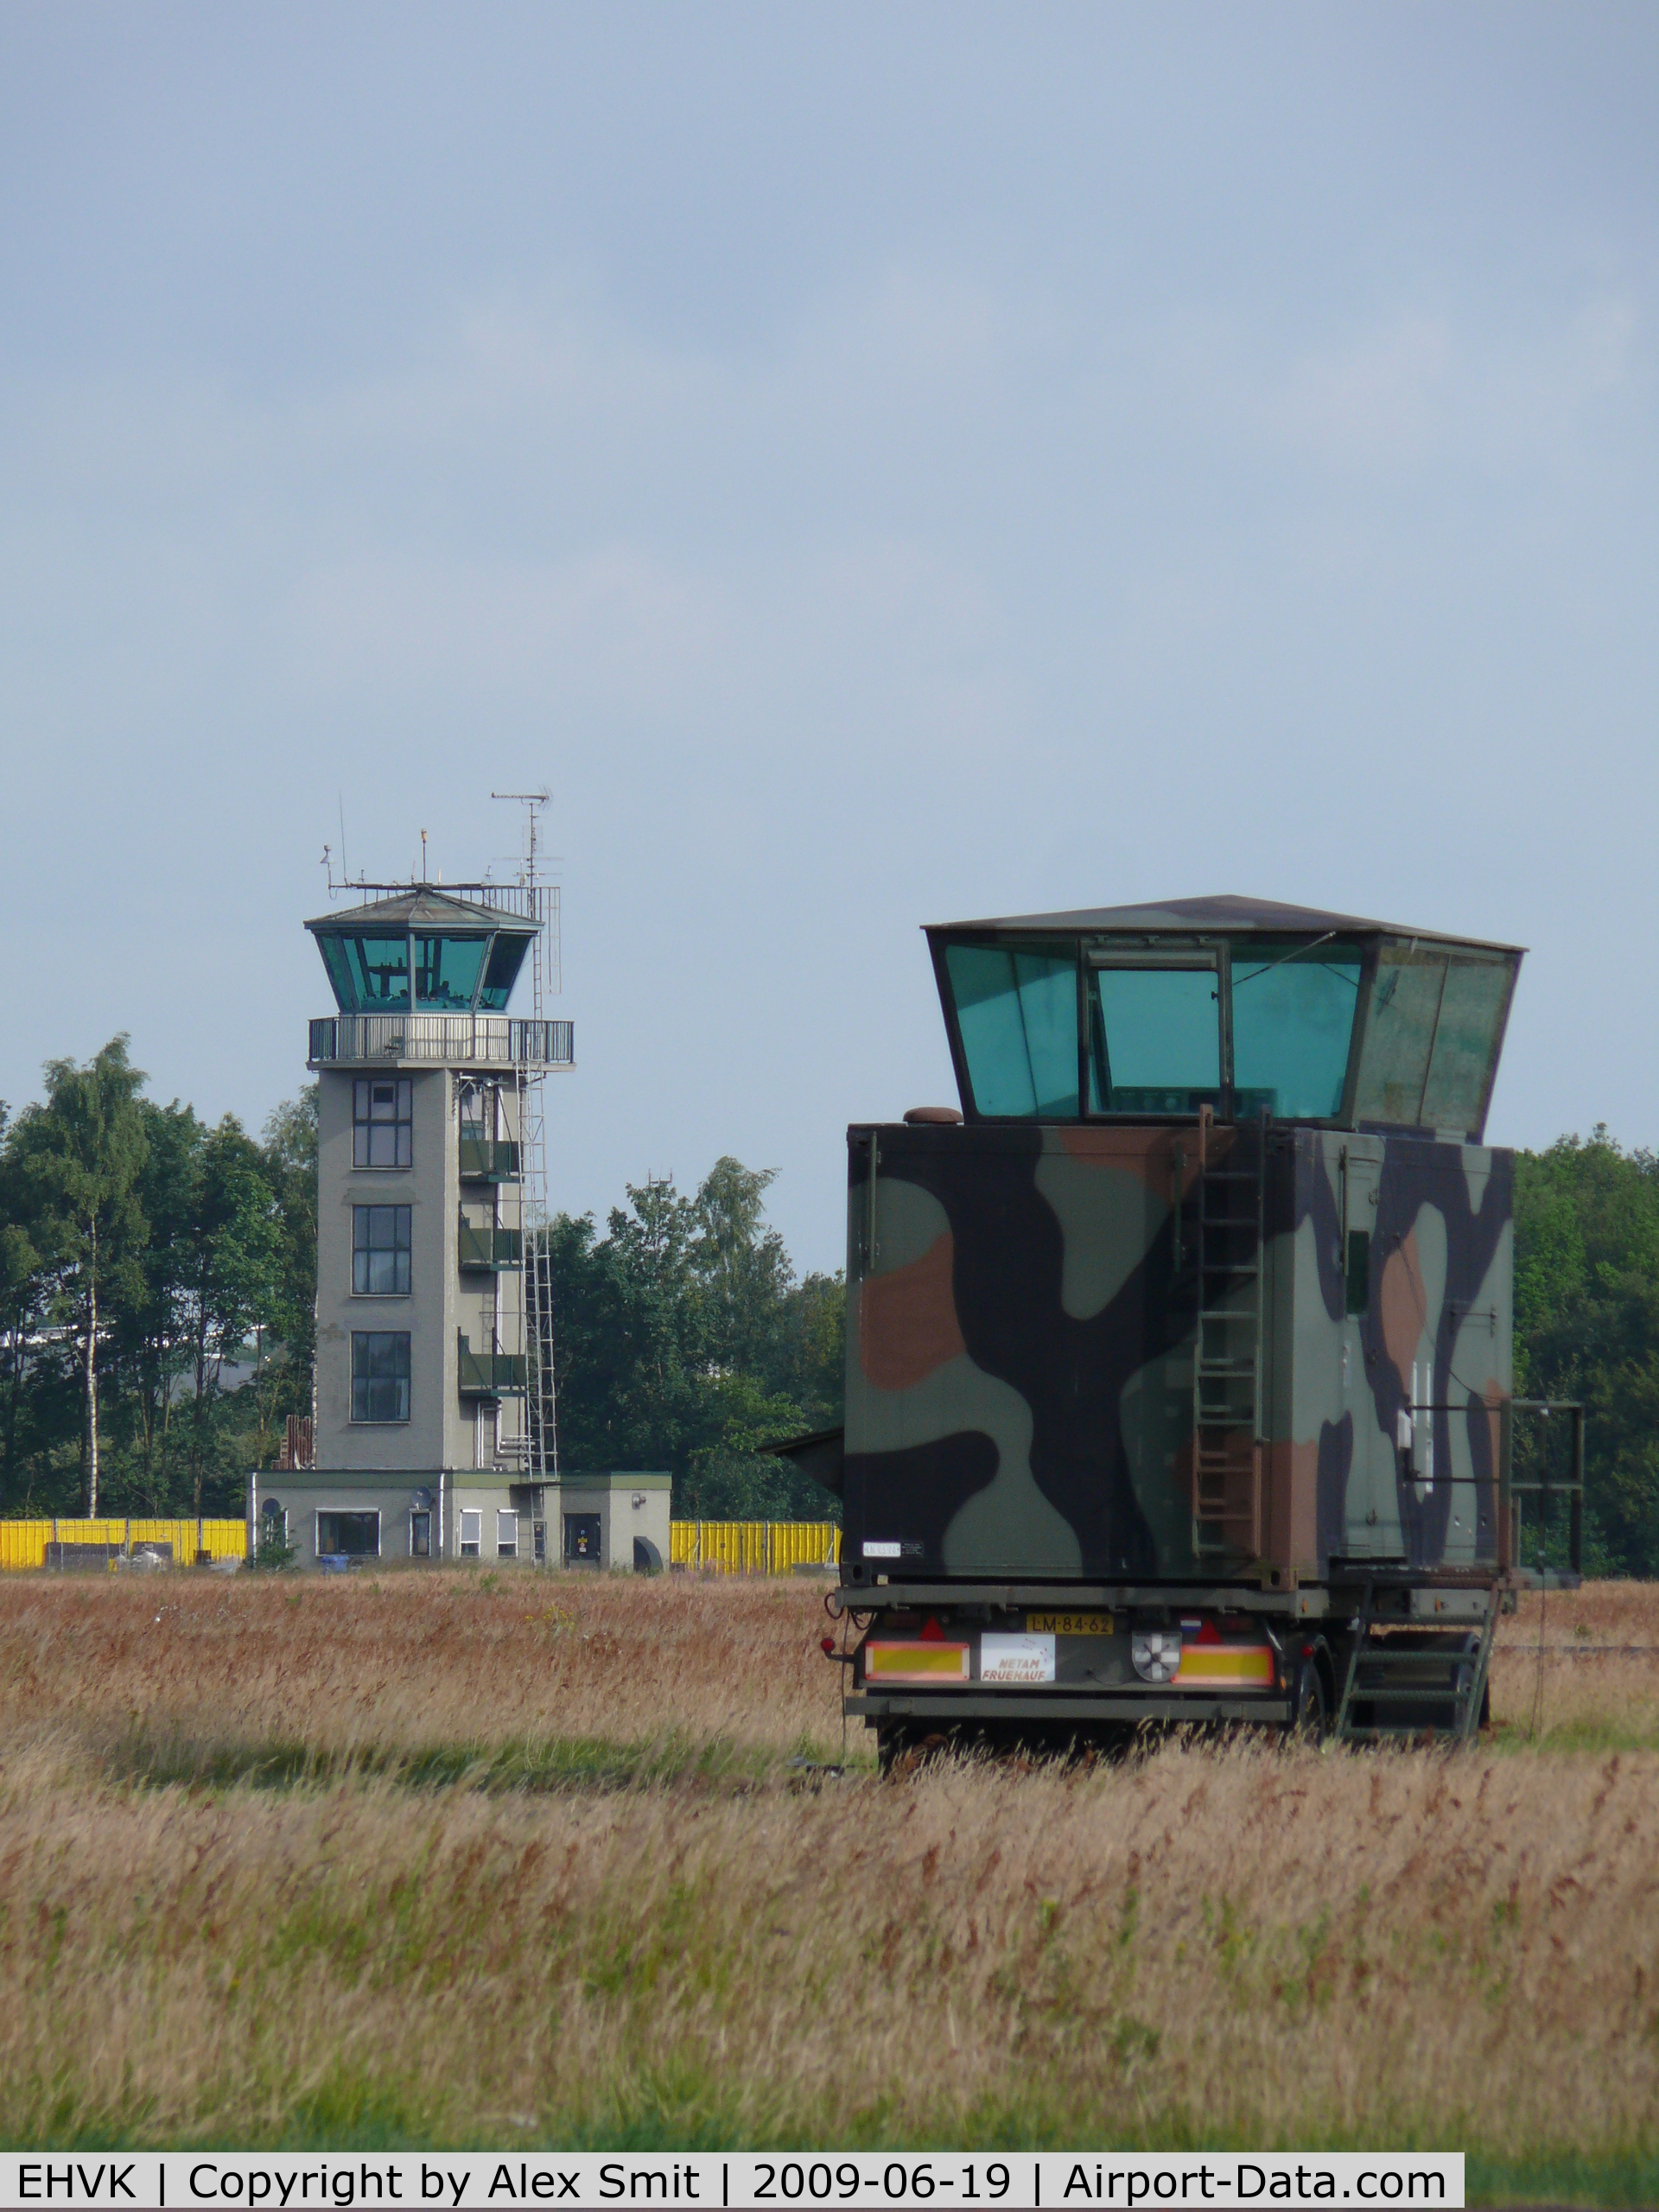 Volkel Airbase Airport, Uden Netherlands (EHVK) - Tower in the back and for the 2009 airshow a mobile tower in the front 